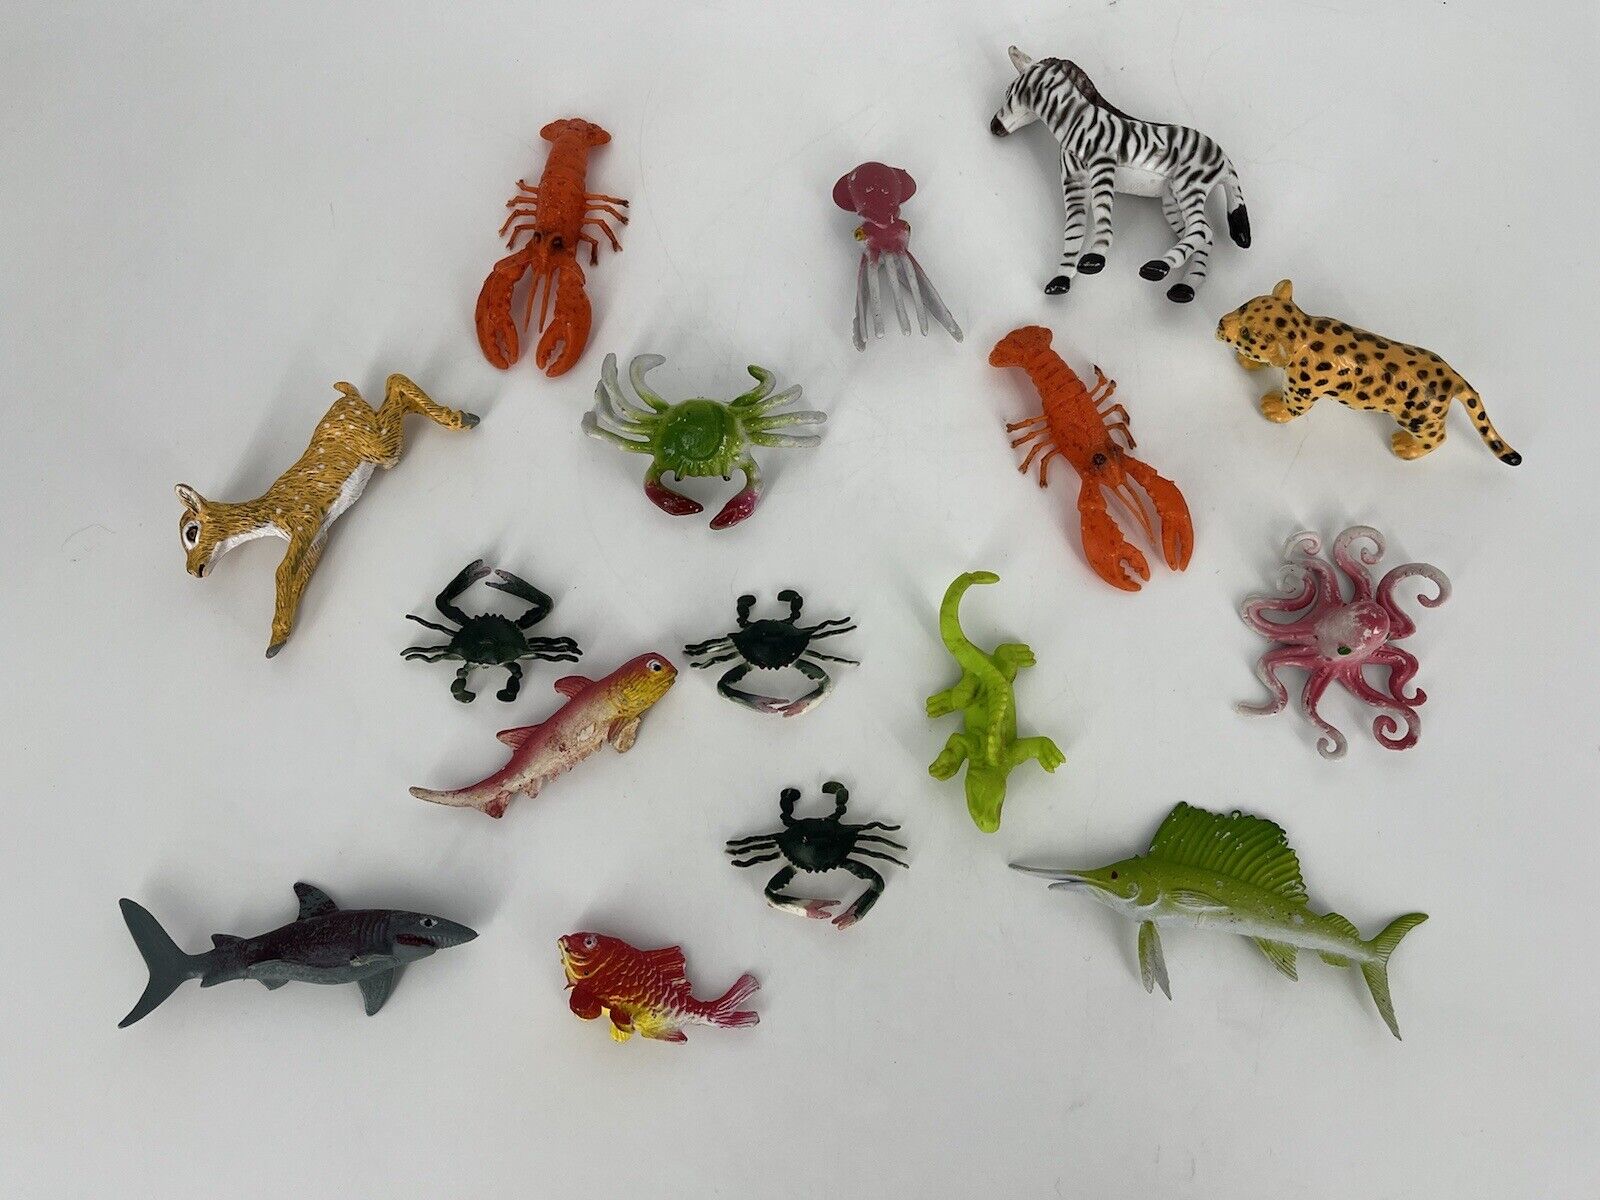 Vintage Lot Of 16 Mixed Sea Water Figures And Animals Plastic Toys 